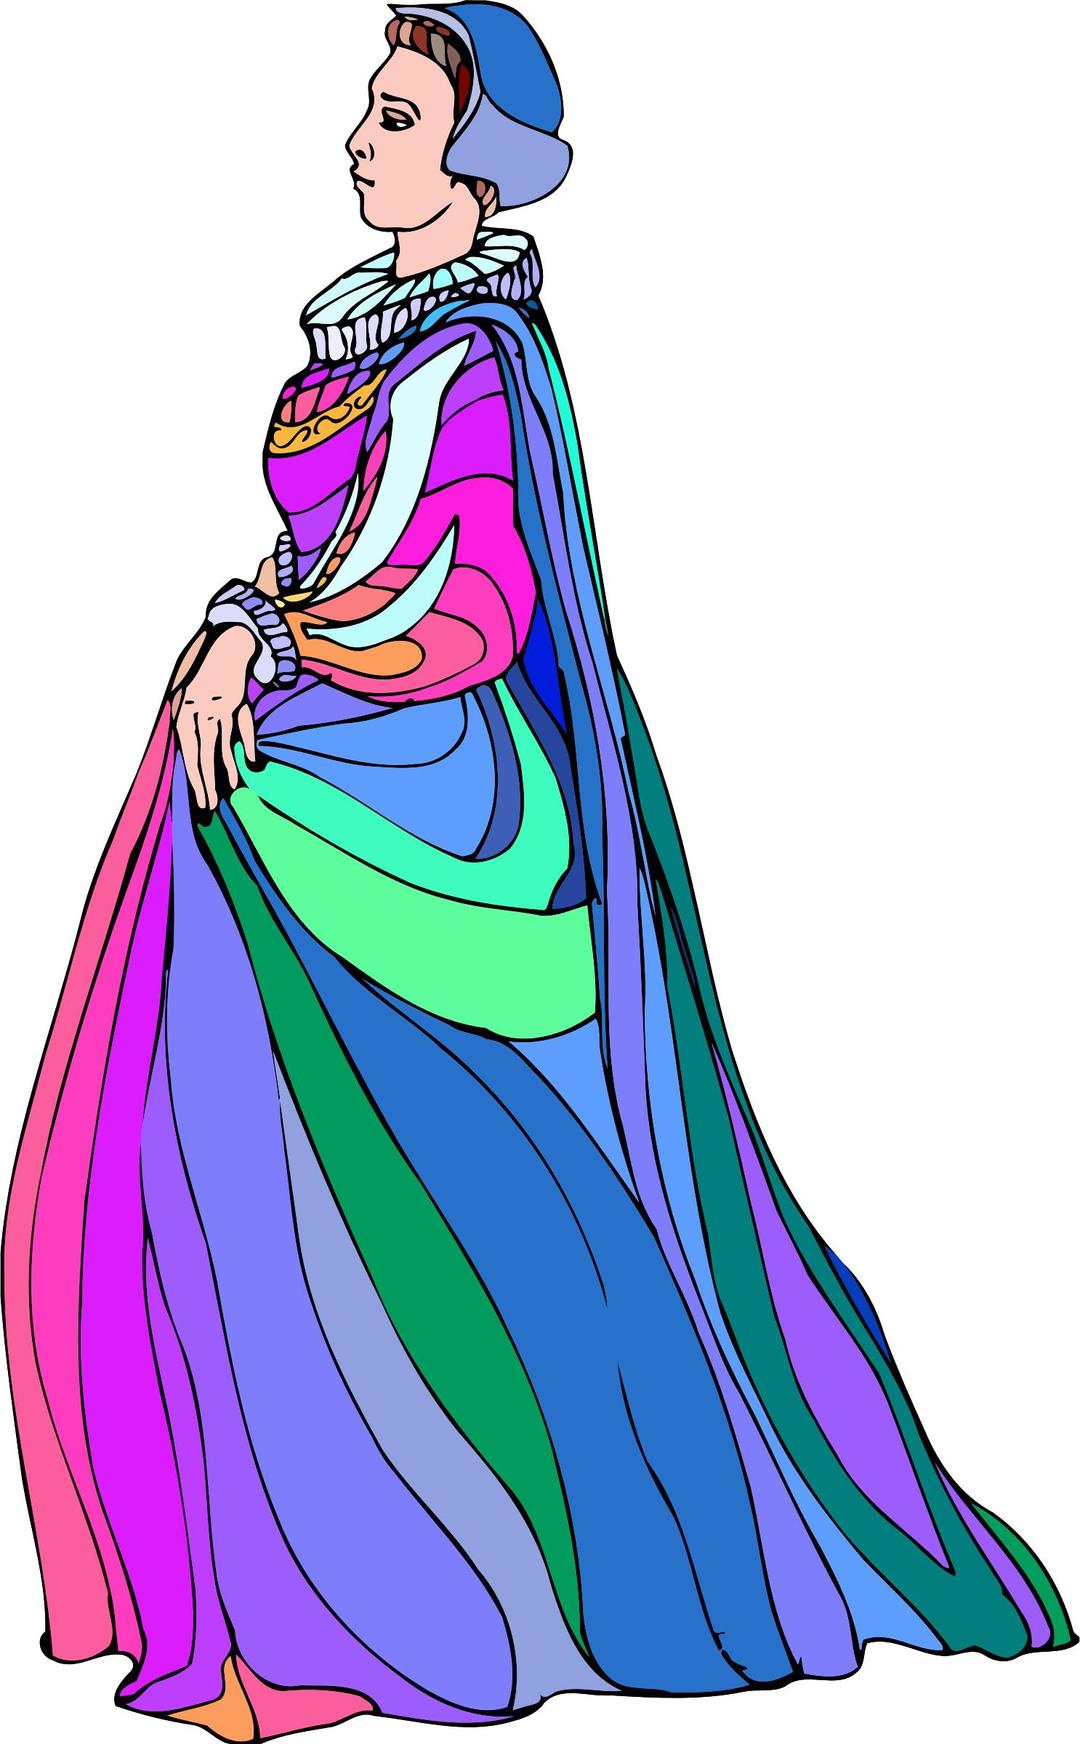 Shakespeare characters - Olivia (colour) png transparent